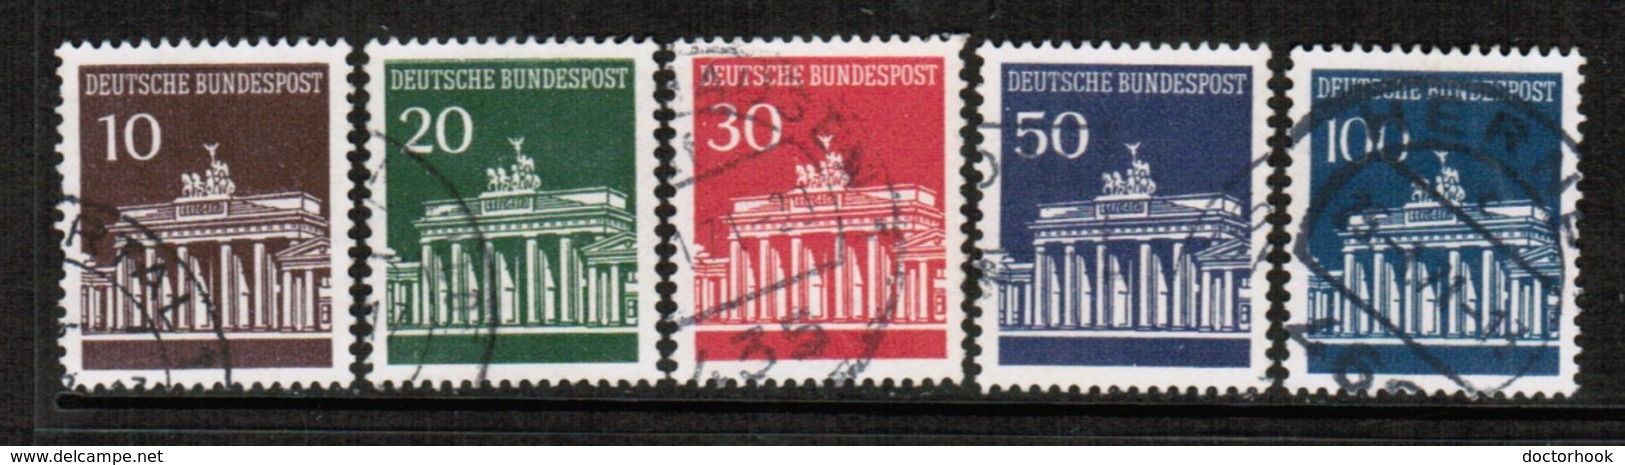 GERMANY  Scott # 952-6 VF USED (Stamp Scan # 458) - Used Stamps